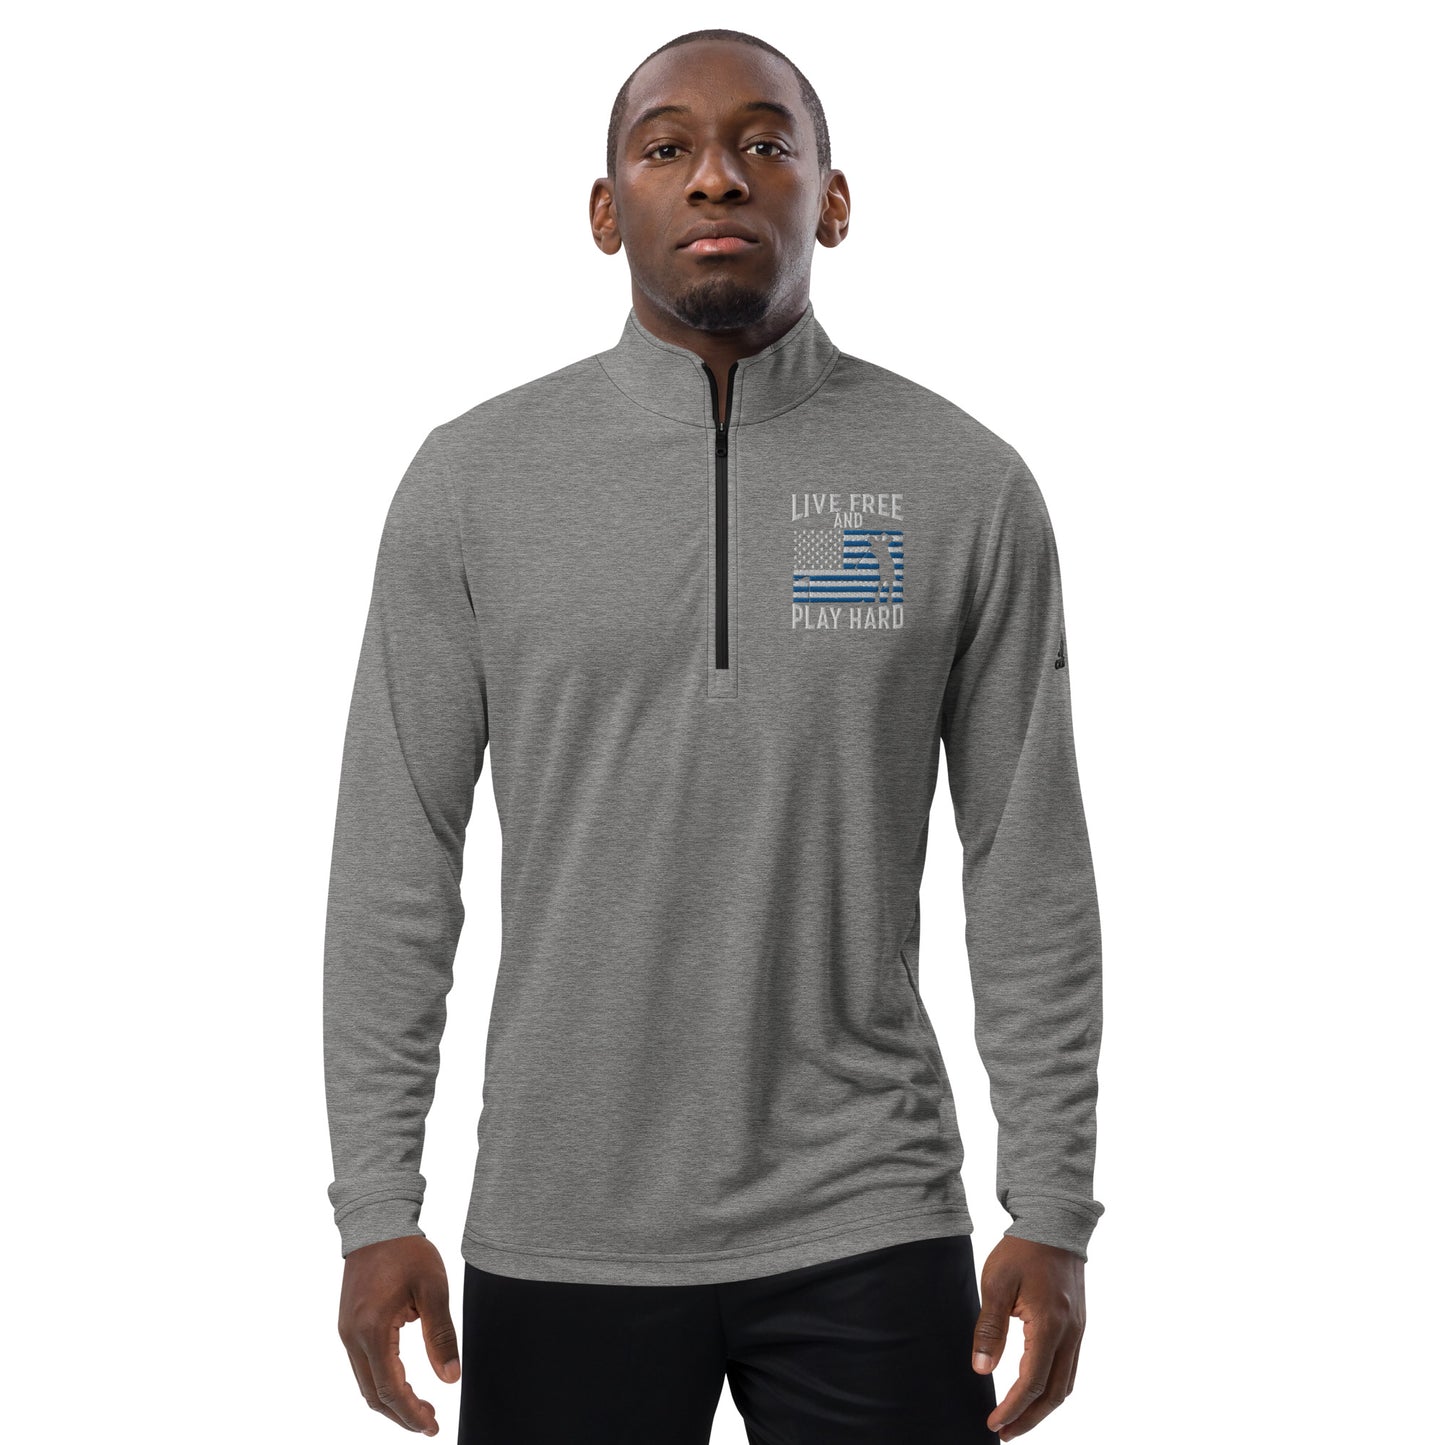 Adidas 'Live Free and Play Hard' 1/4 Zip Golf Pullover (Police Appreciation)